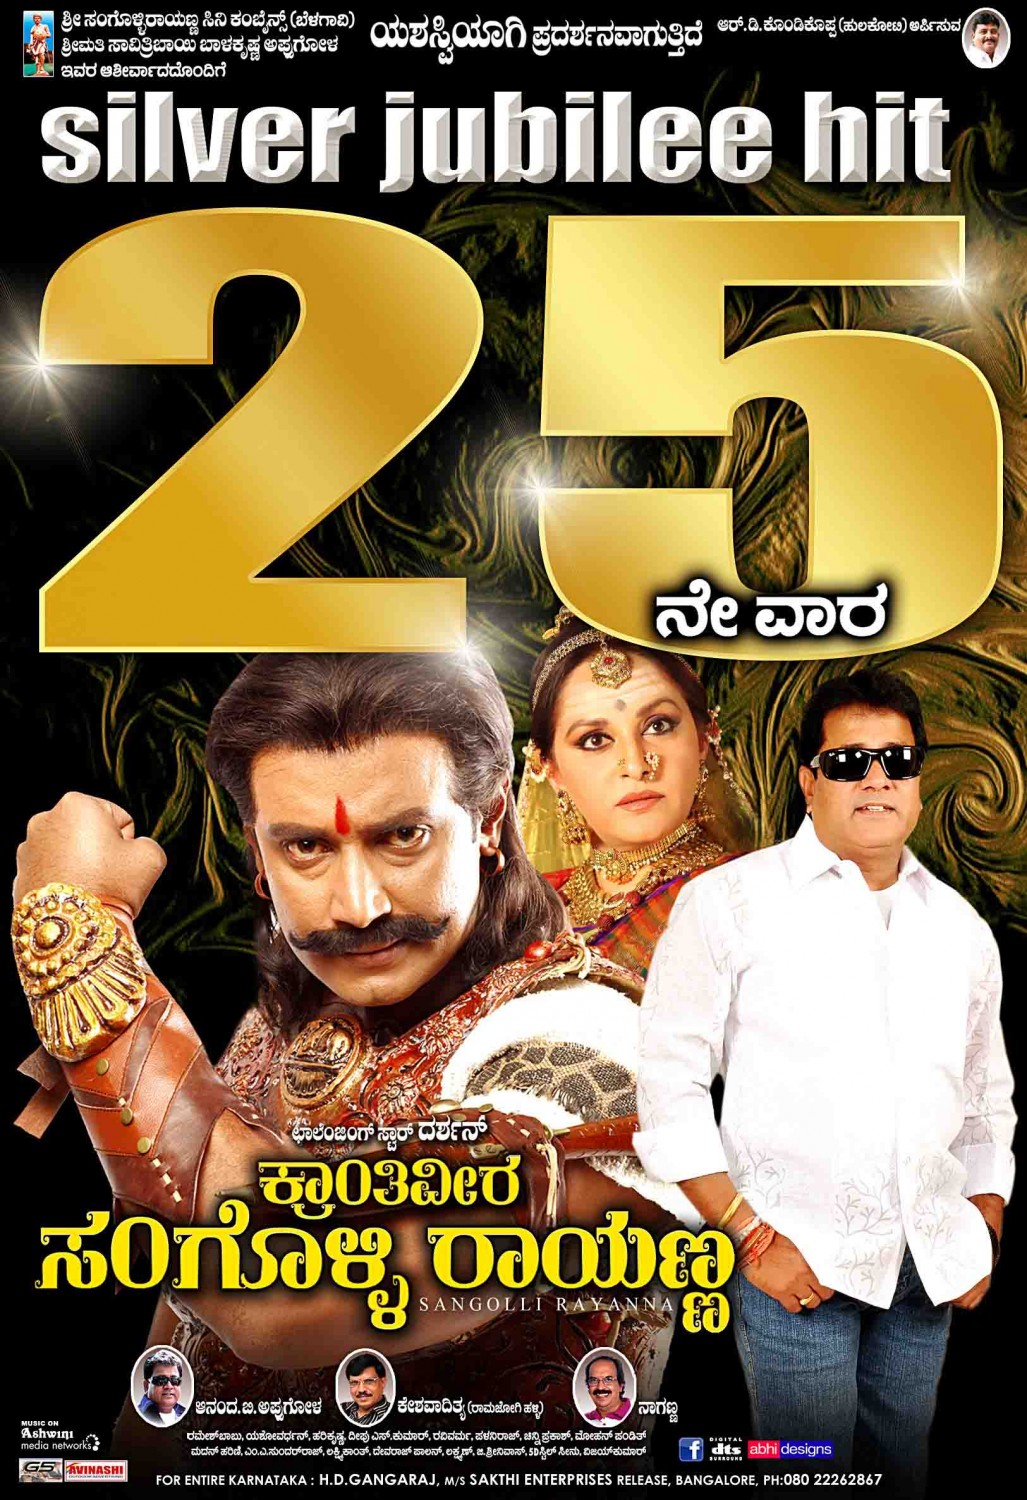 Extra Large Movie Poster Image for Sangolli Rayanna (#74 of 79)